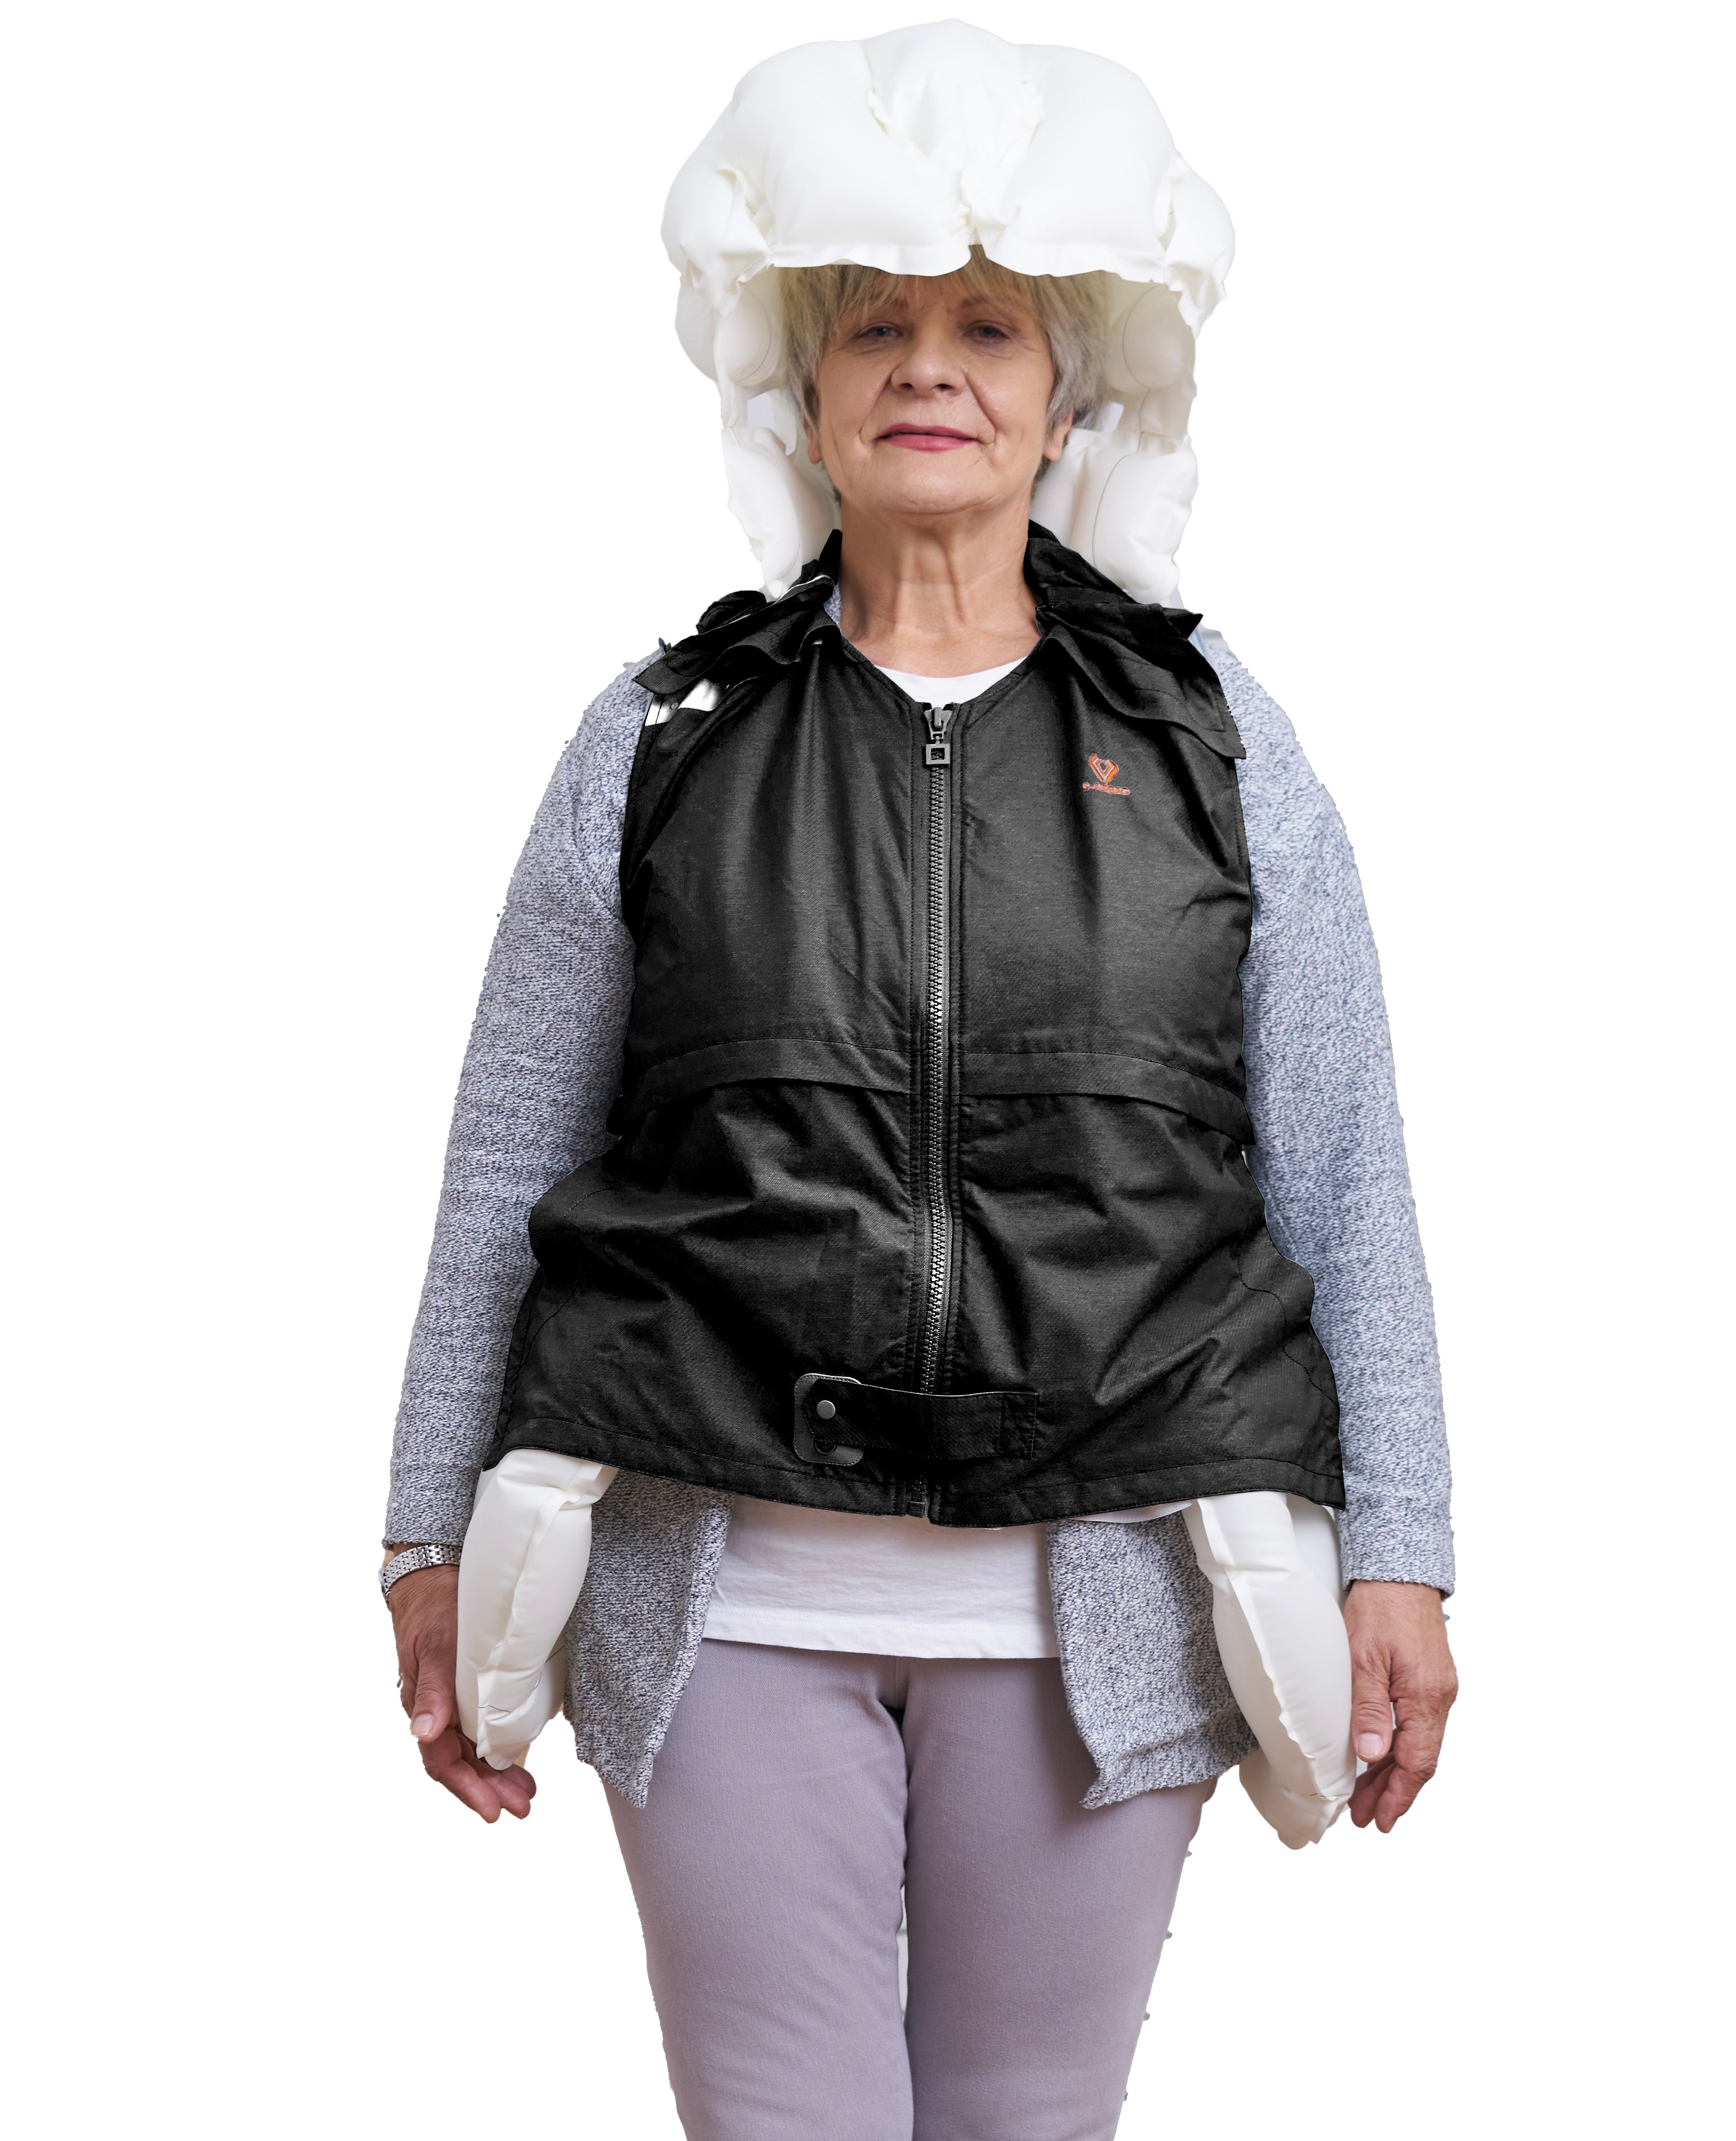 Smart anti fall airbag vest for the elderly airbagvest  By Human body  protection expert  Facebook